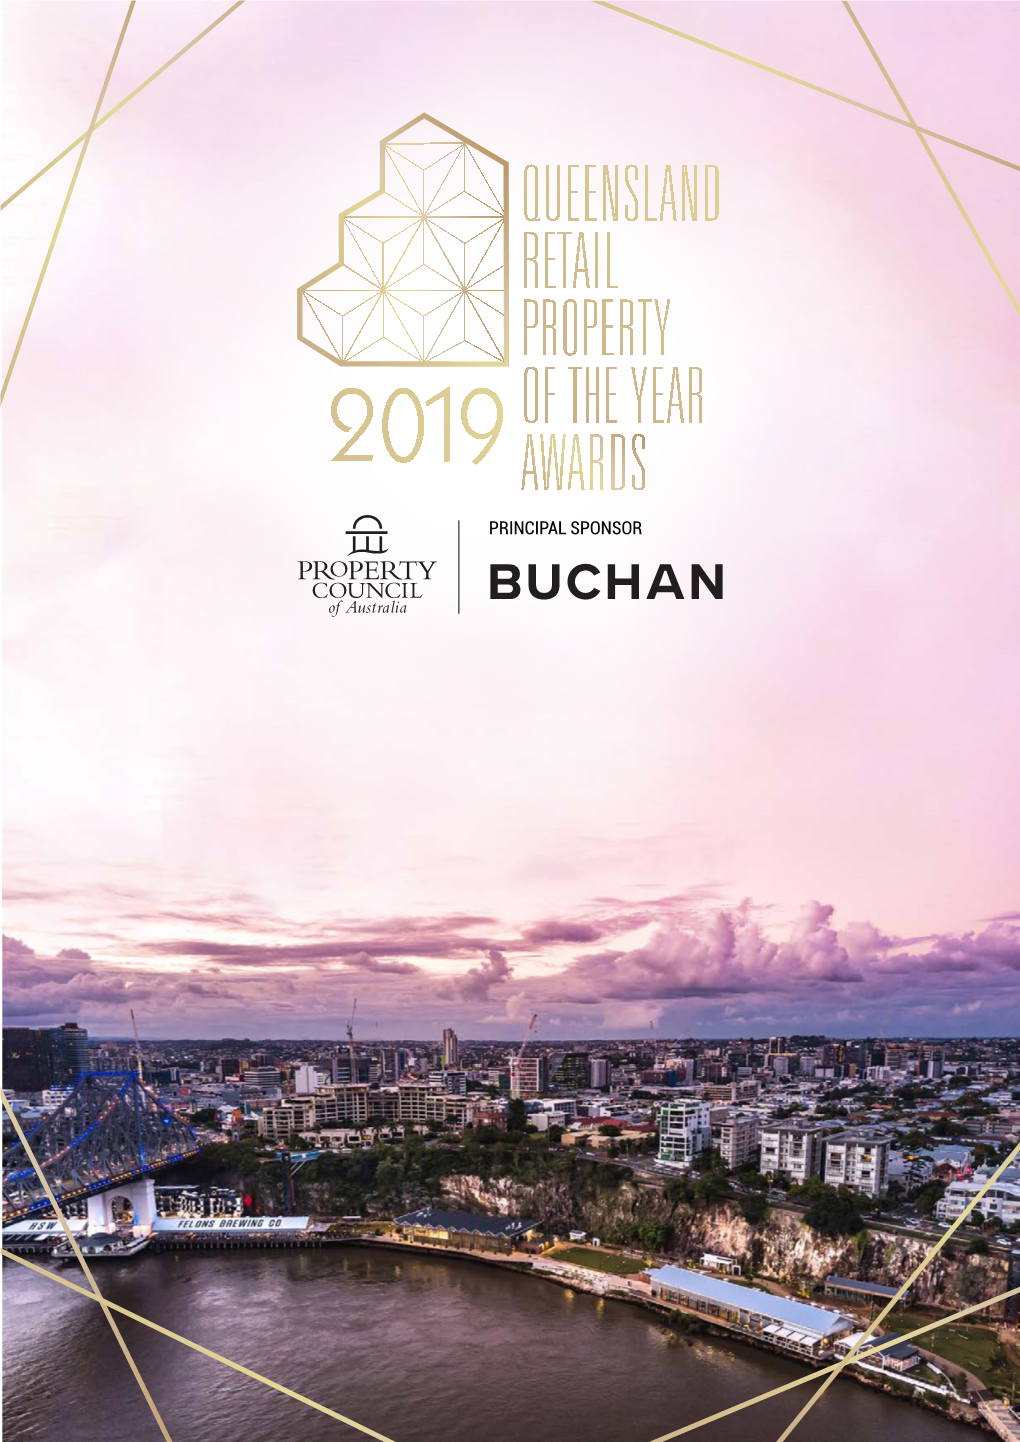 2019 Queensland Retail Property of the Year